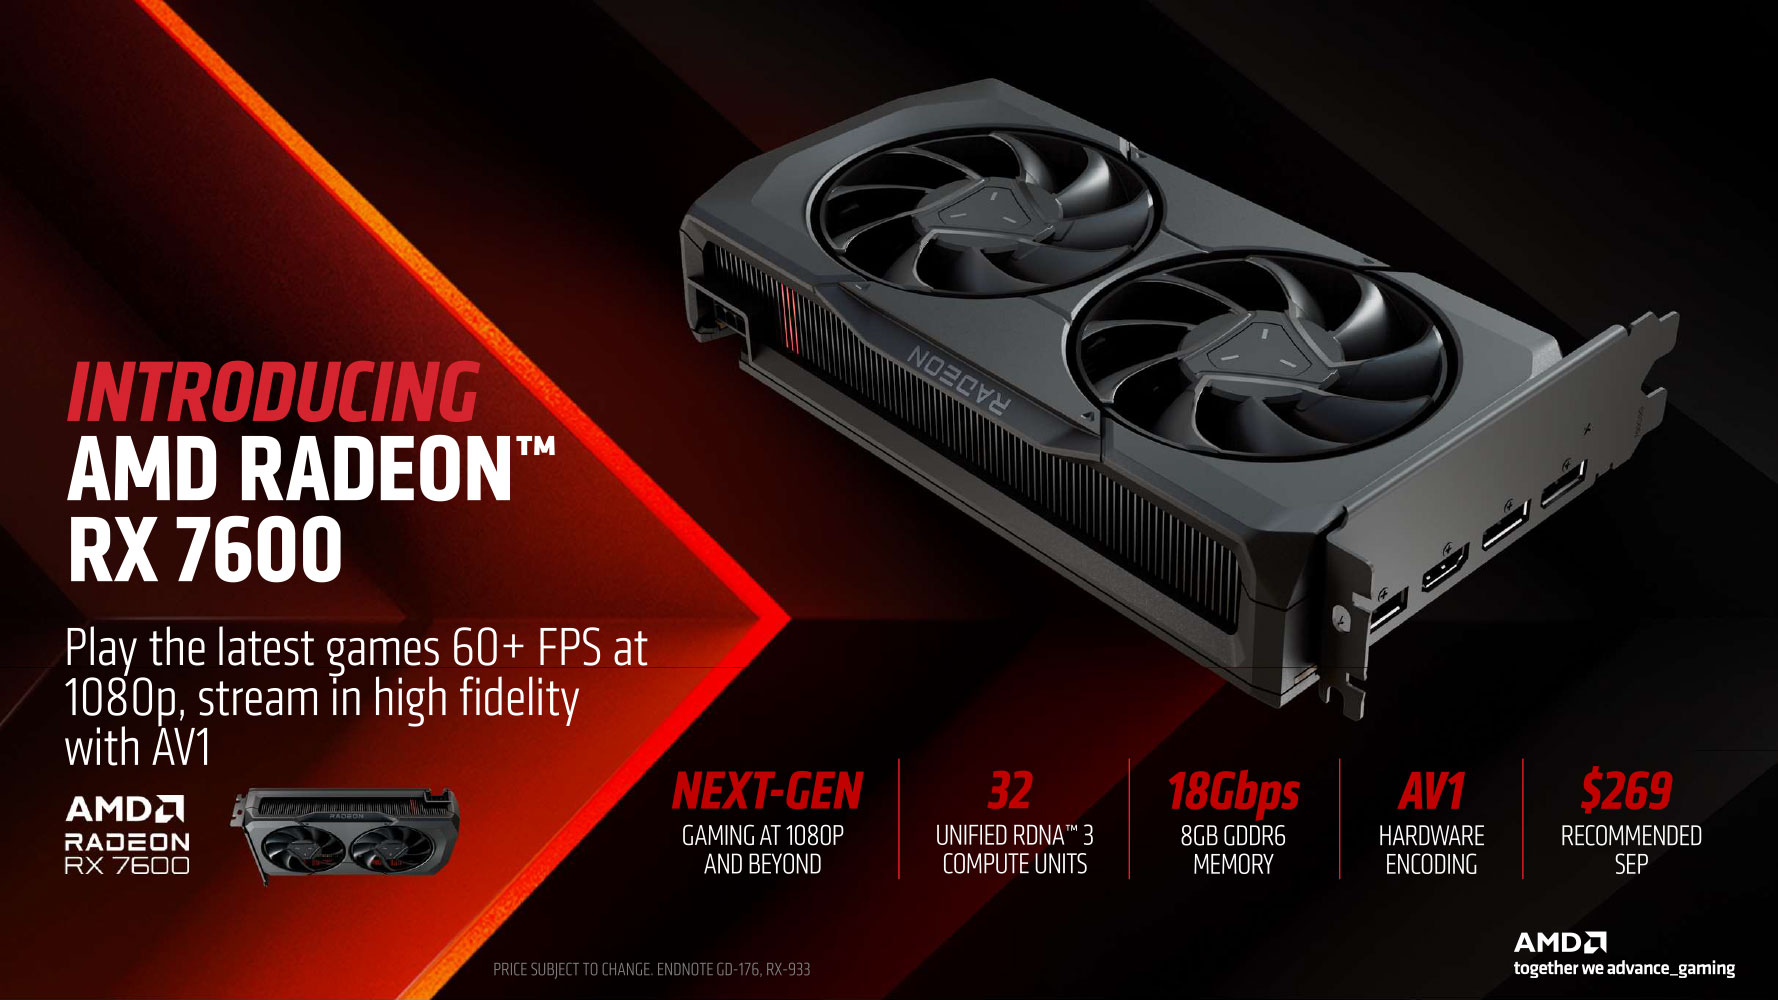 AMD Radeon RX 7600 Review - For 1080p Gamers - Architecture | TechPowerUp